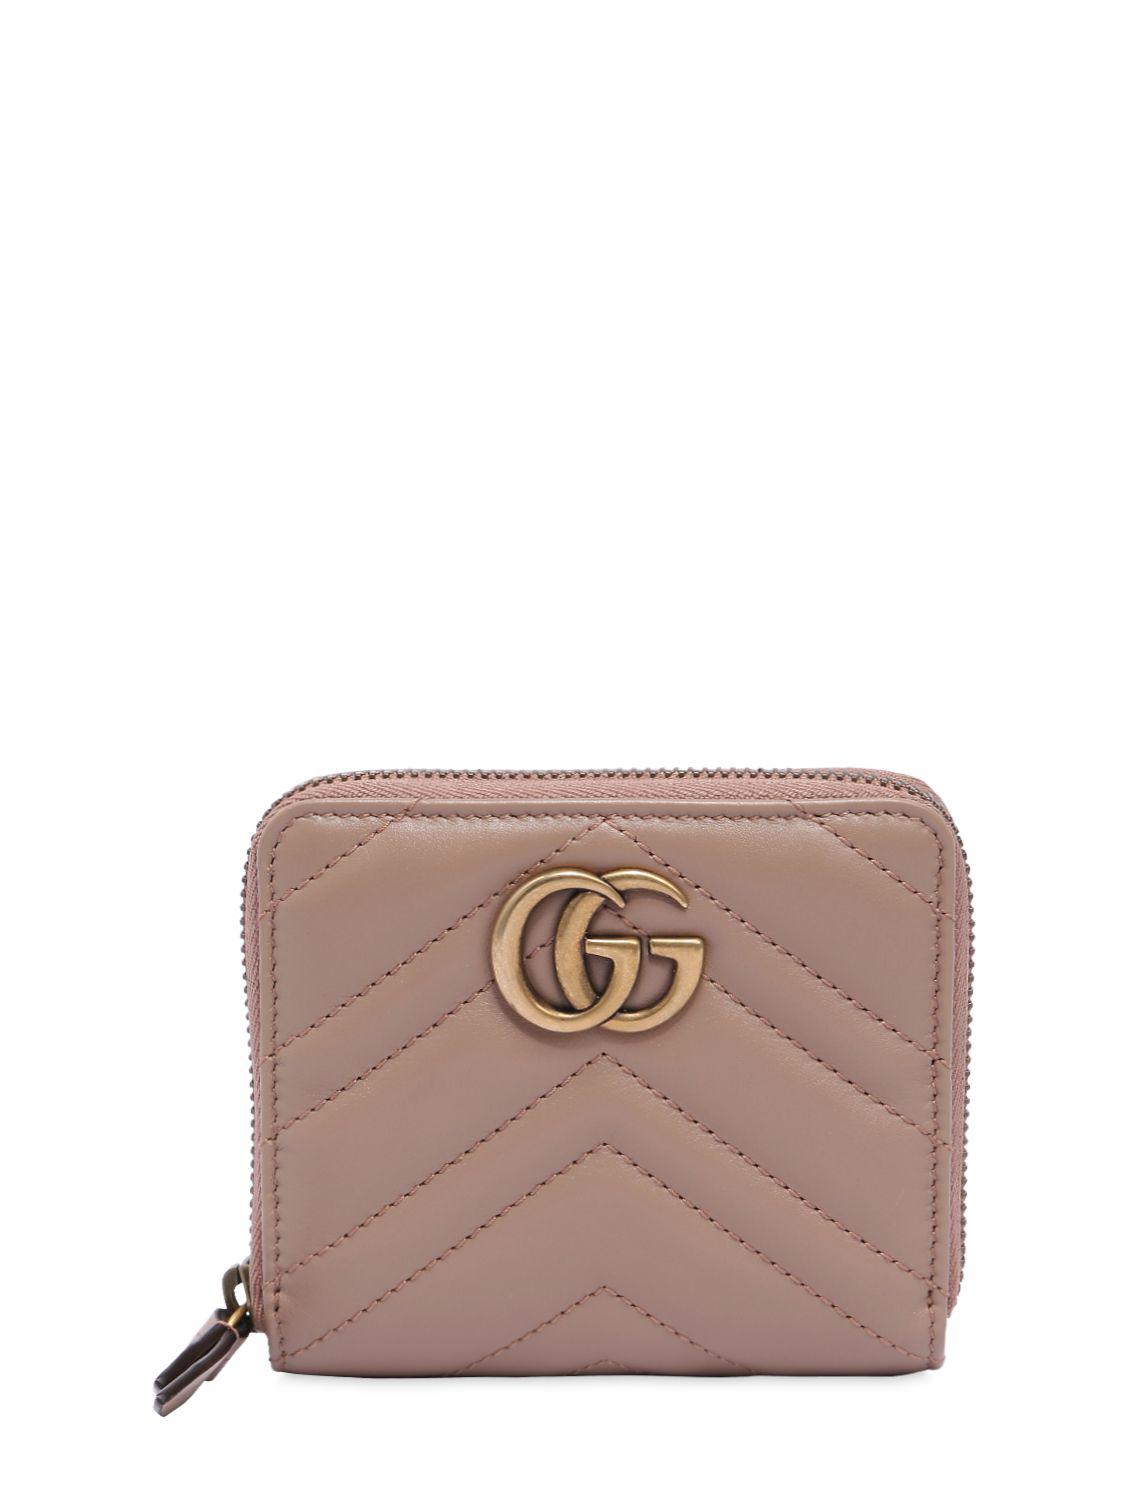 Gg Marmont 2.0 Leather Zip Wallet 